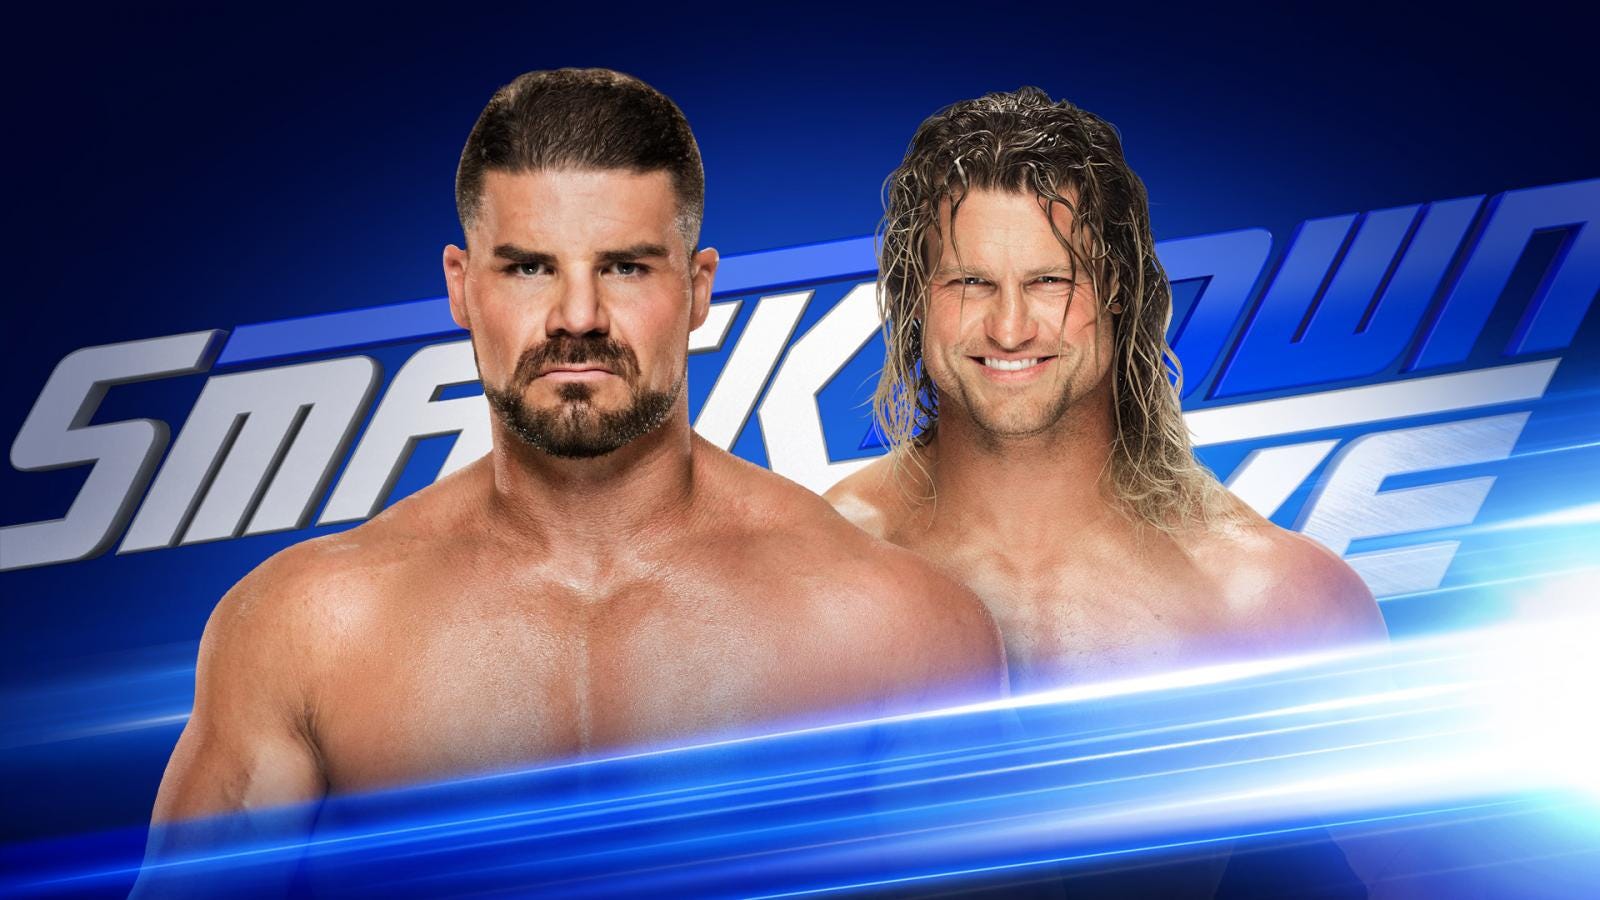 Mitchell S Wwe Smackdown Live Report 10 17 17 By Steven Mitchell Medium